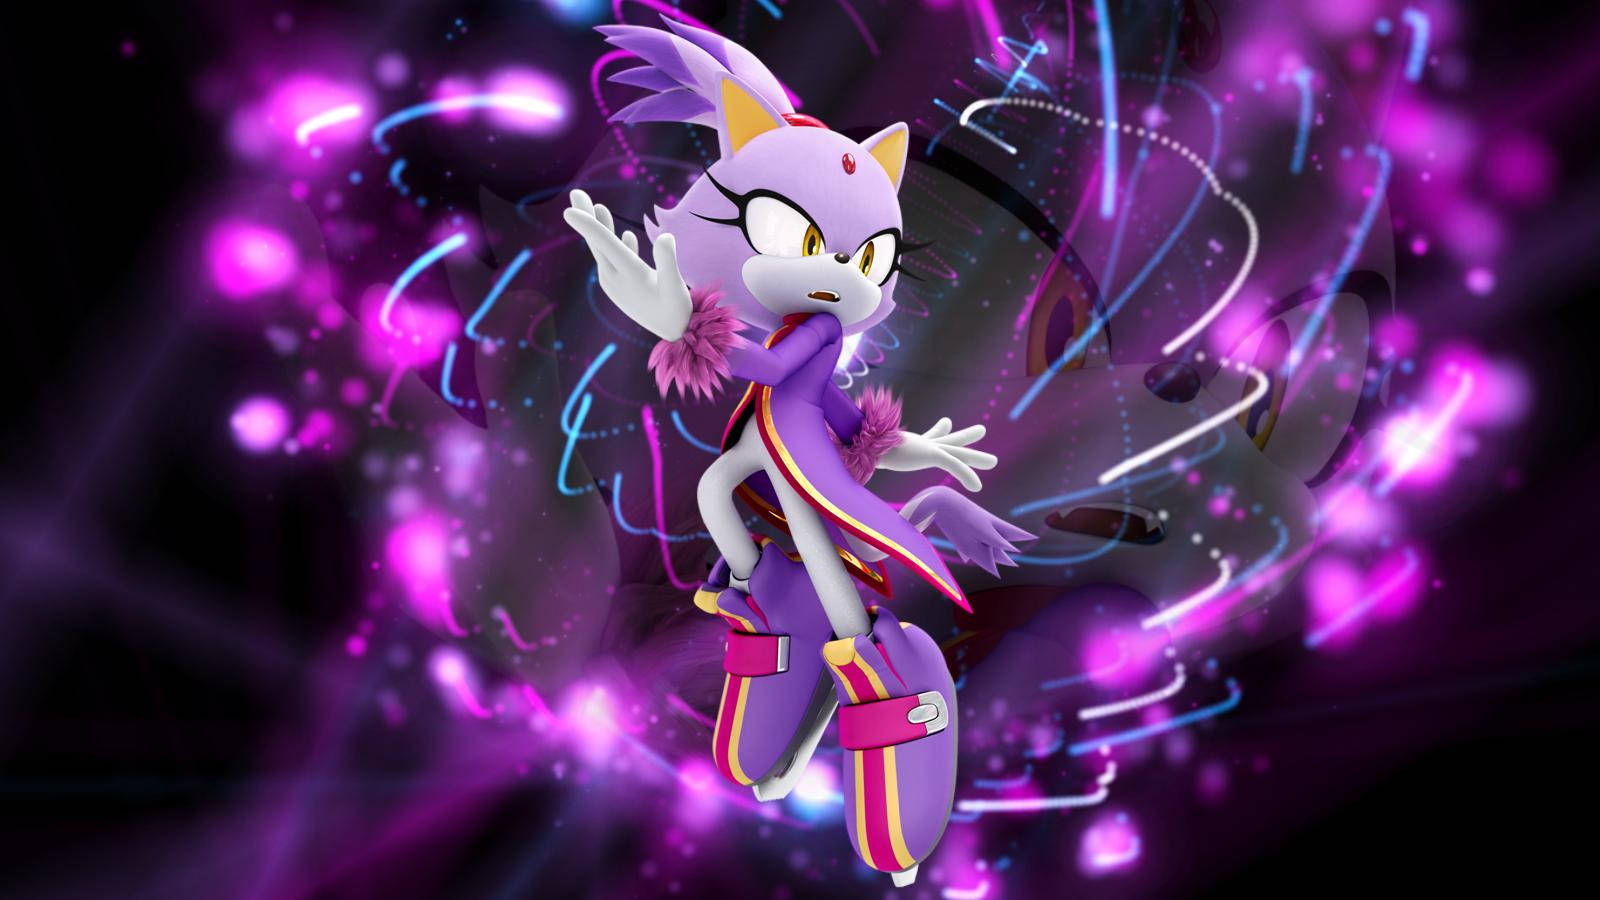 20 Blaze the Cat HD Wallpapers and Backgrounds